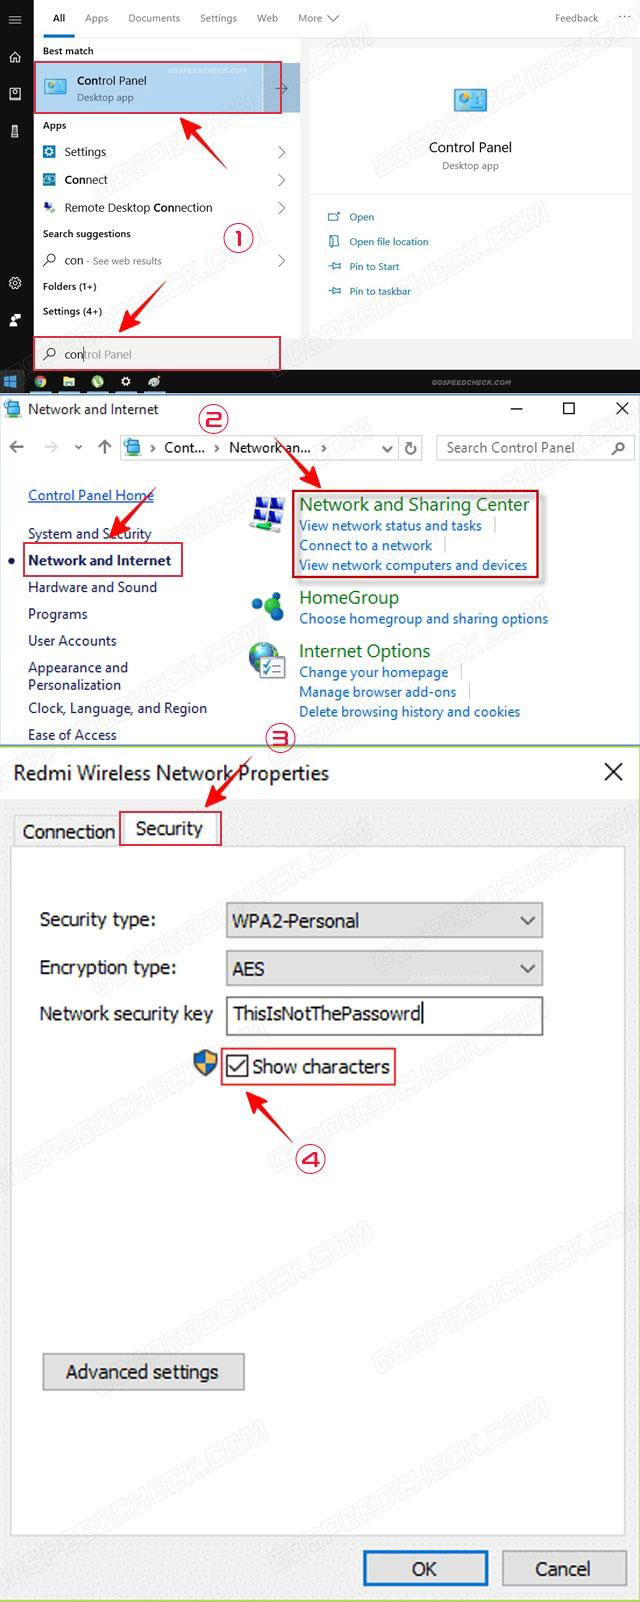 You can check your WiFi password on Windows